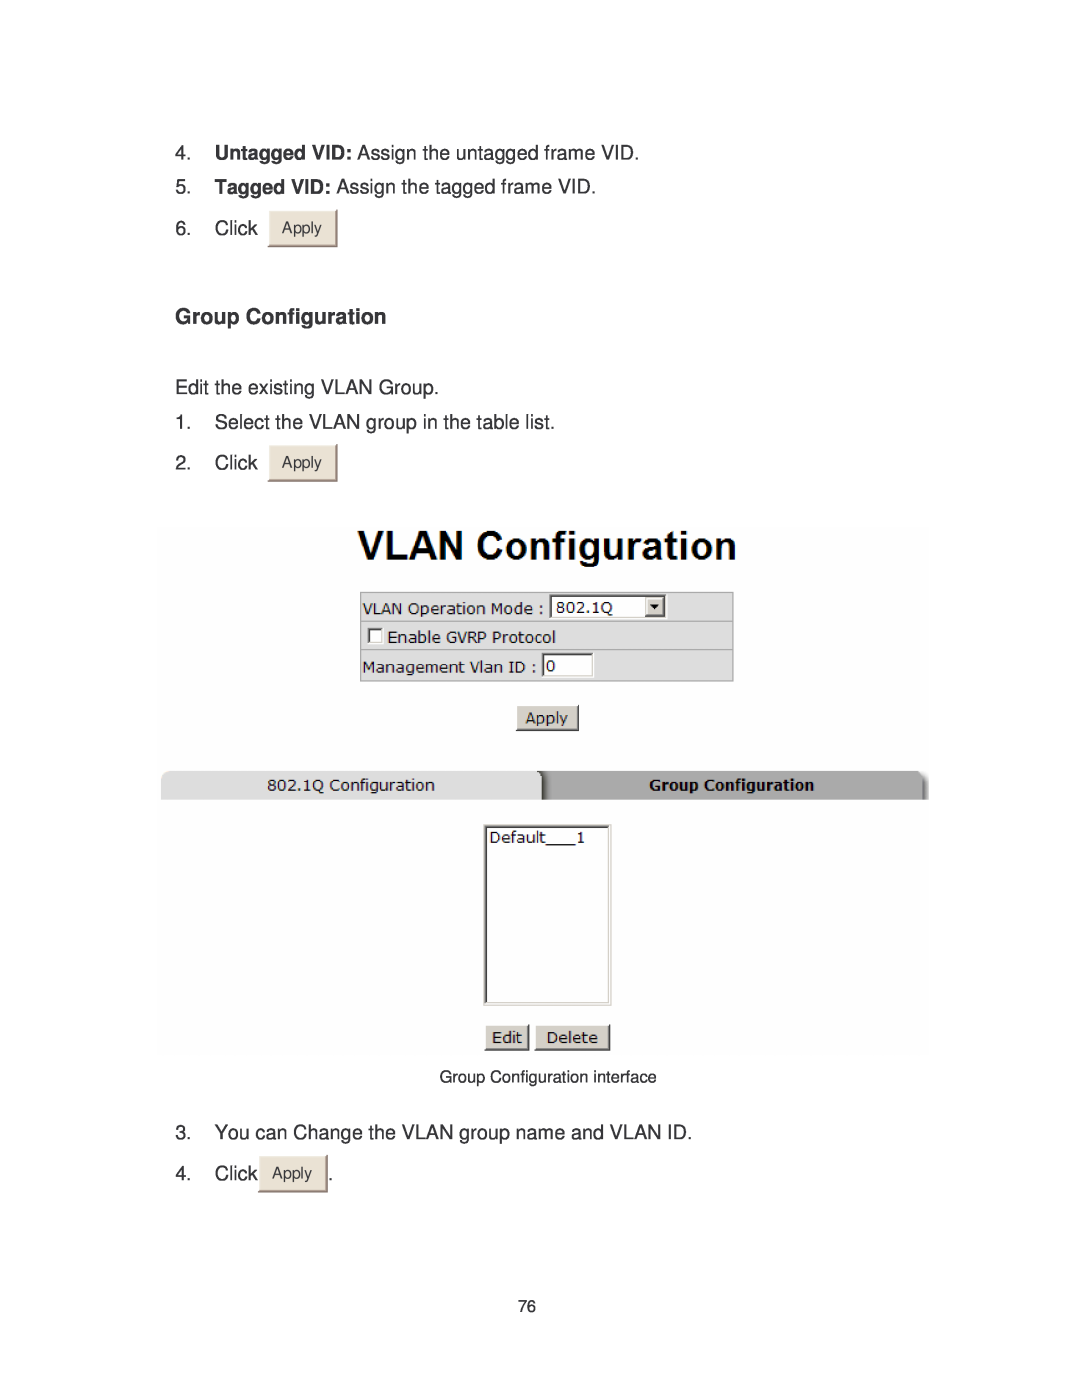 Transition Networks Group Configuration, Untagged VID Assign the untagged frame VID, Click, Edit the existing VLAN Group 